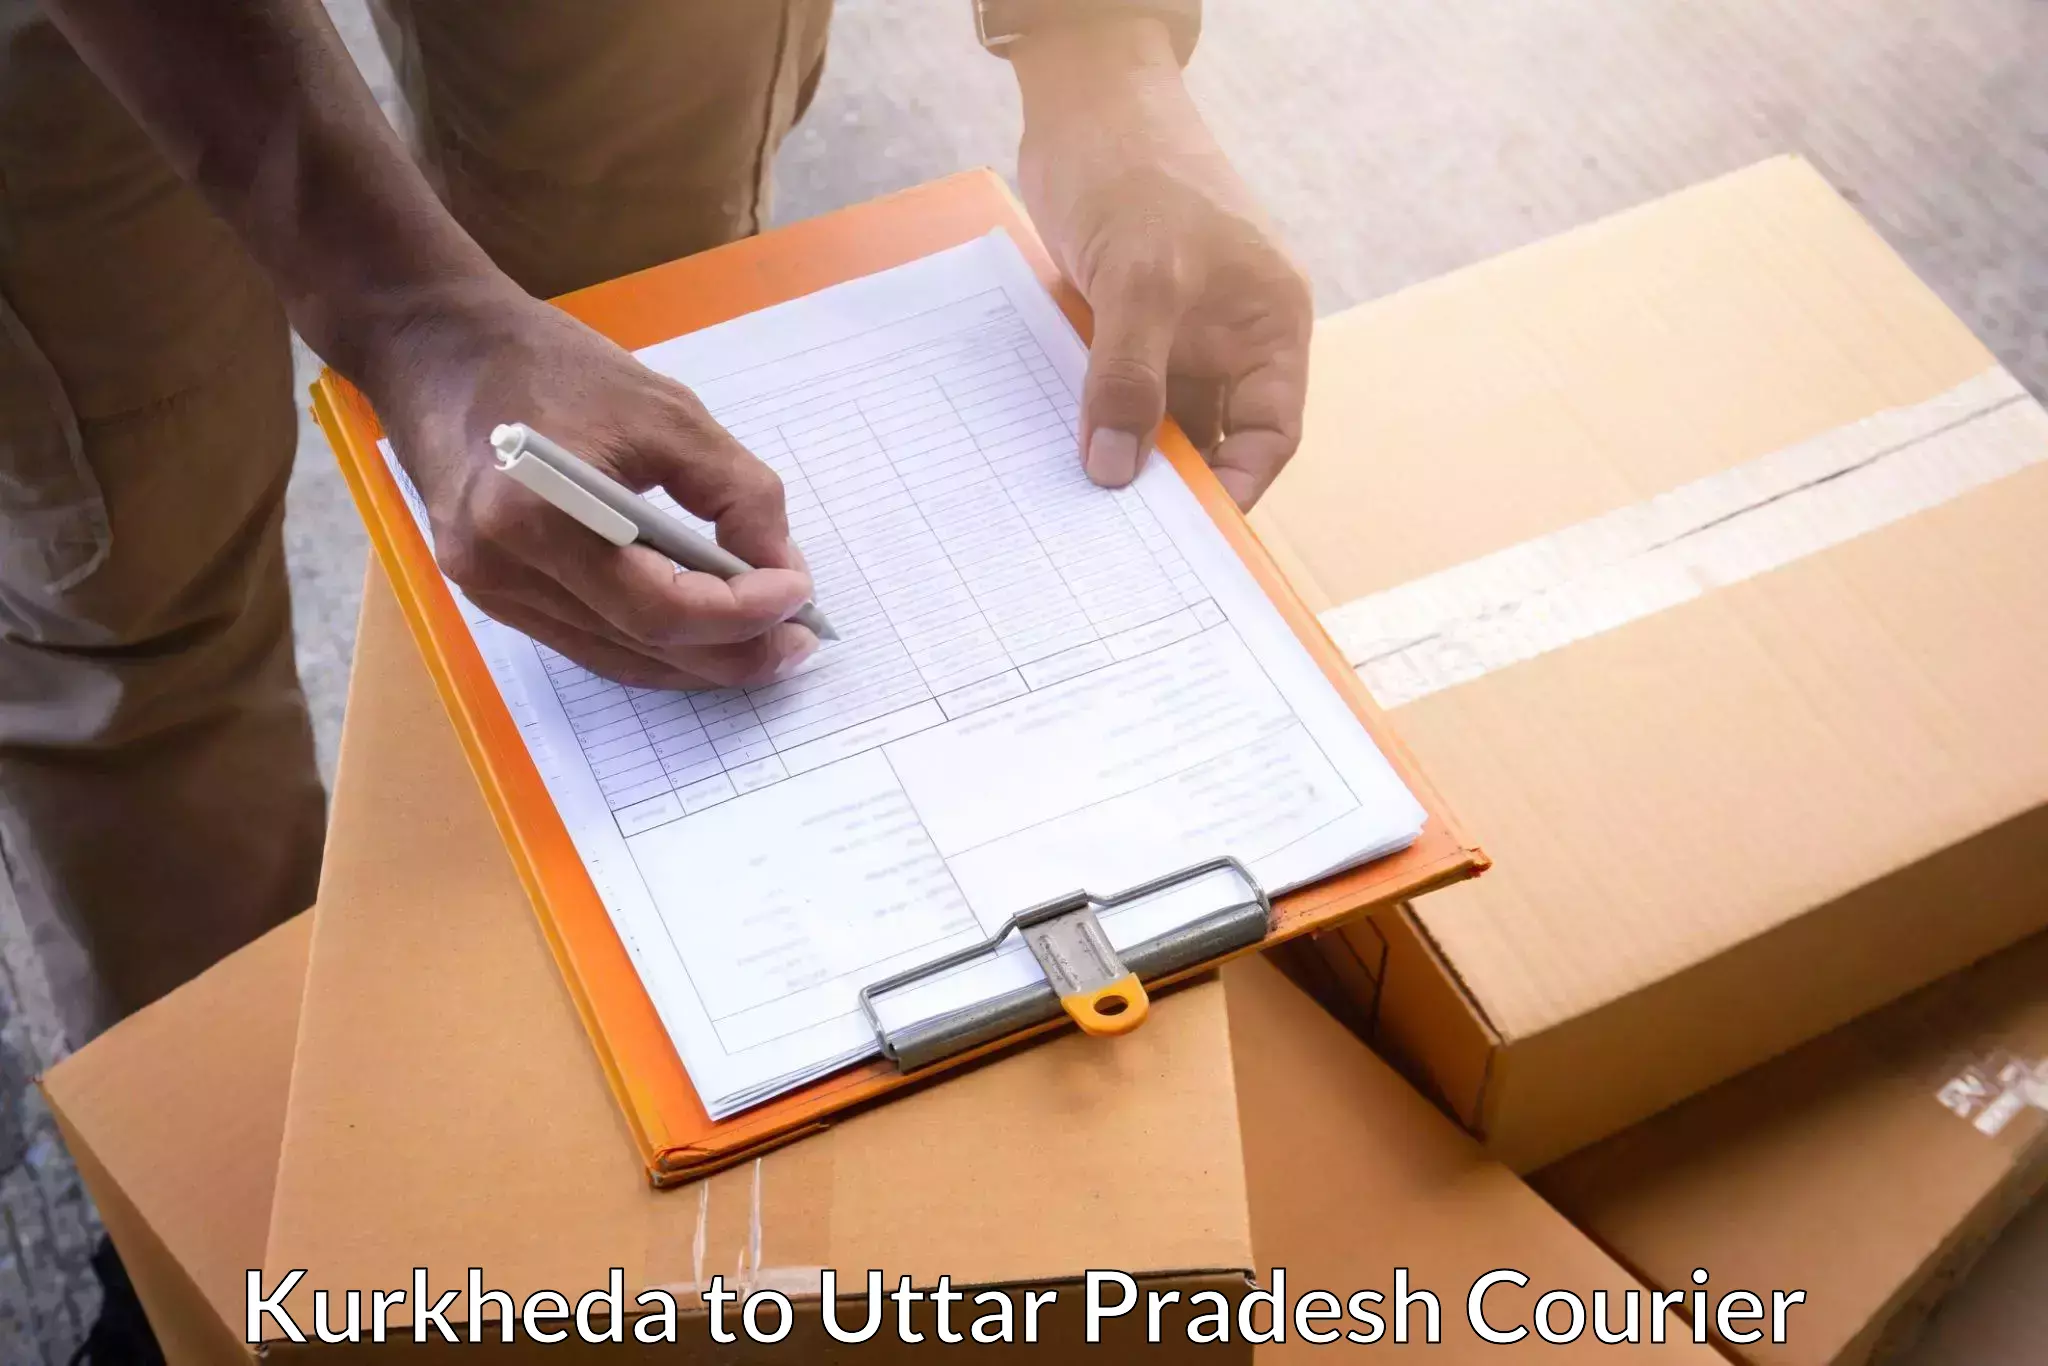 State-of-the-art courier technology Kurkheda to Rajesultanpur